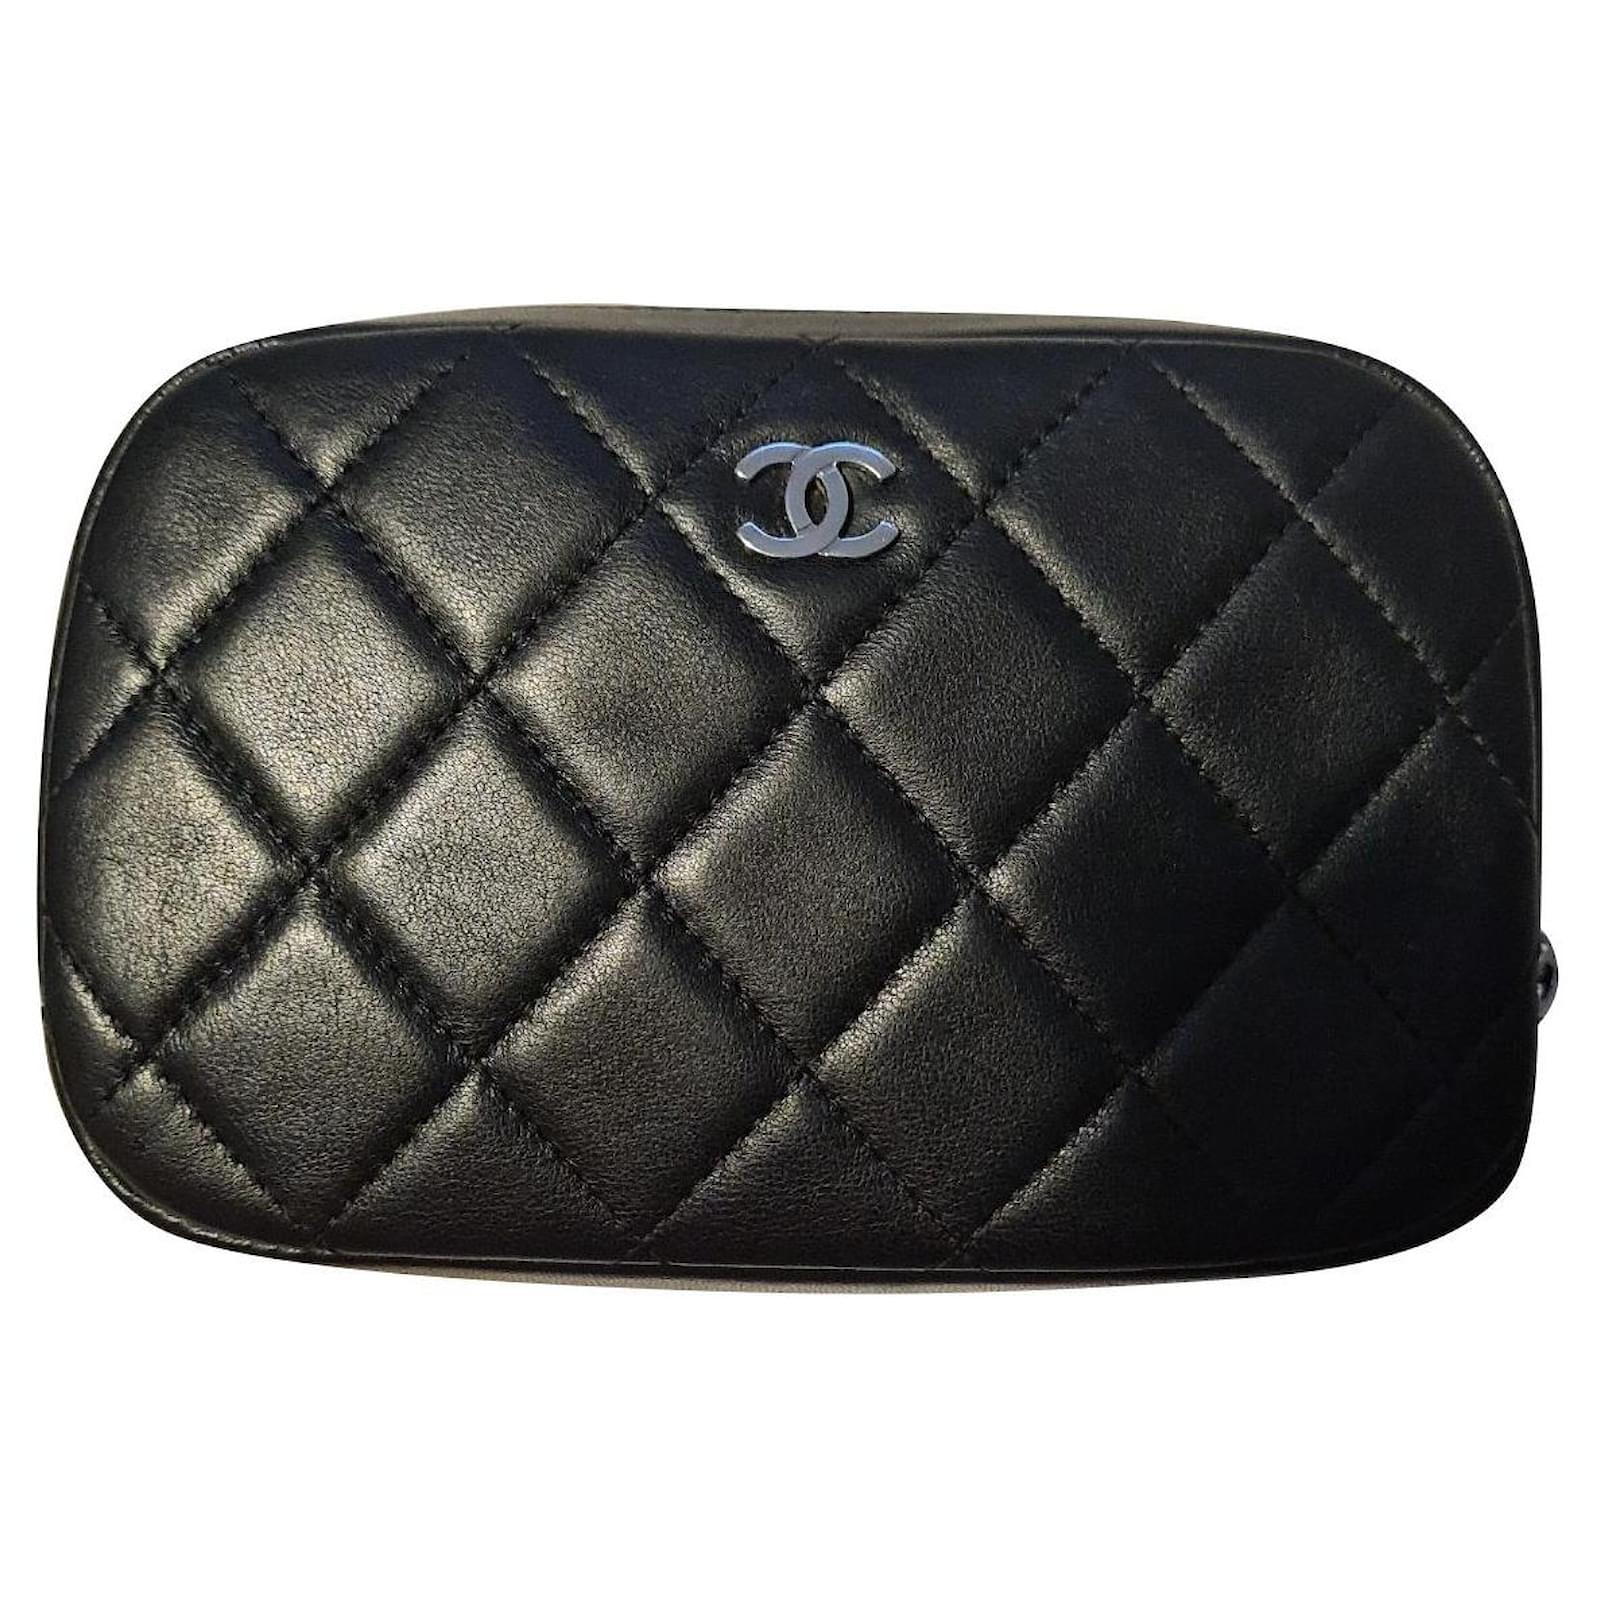 Chanel Caviar Quilted Small Cosmetic Case Black